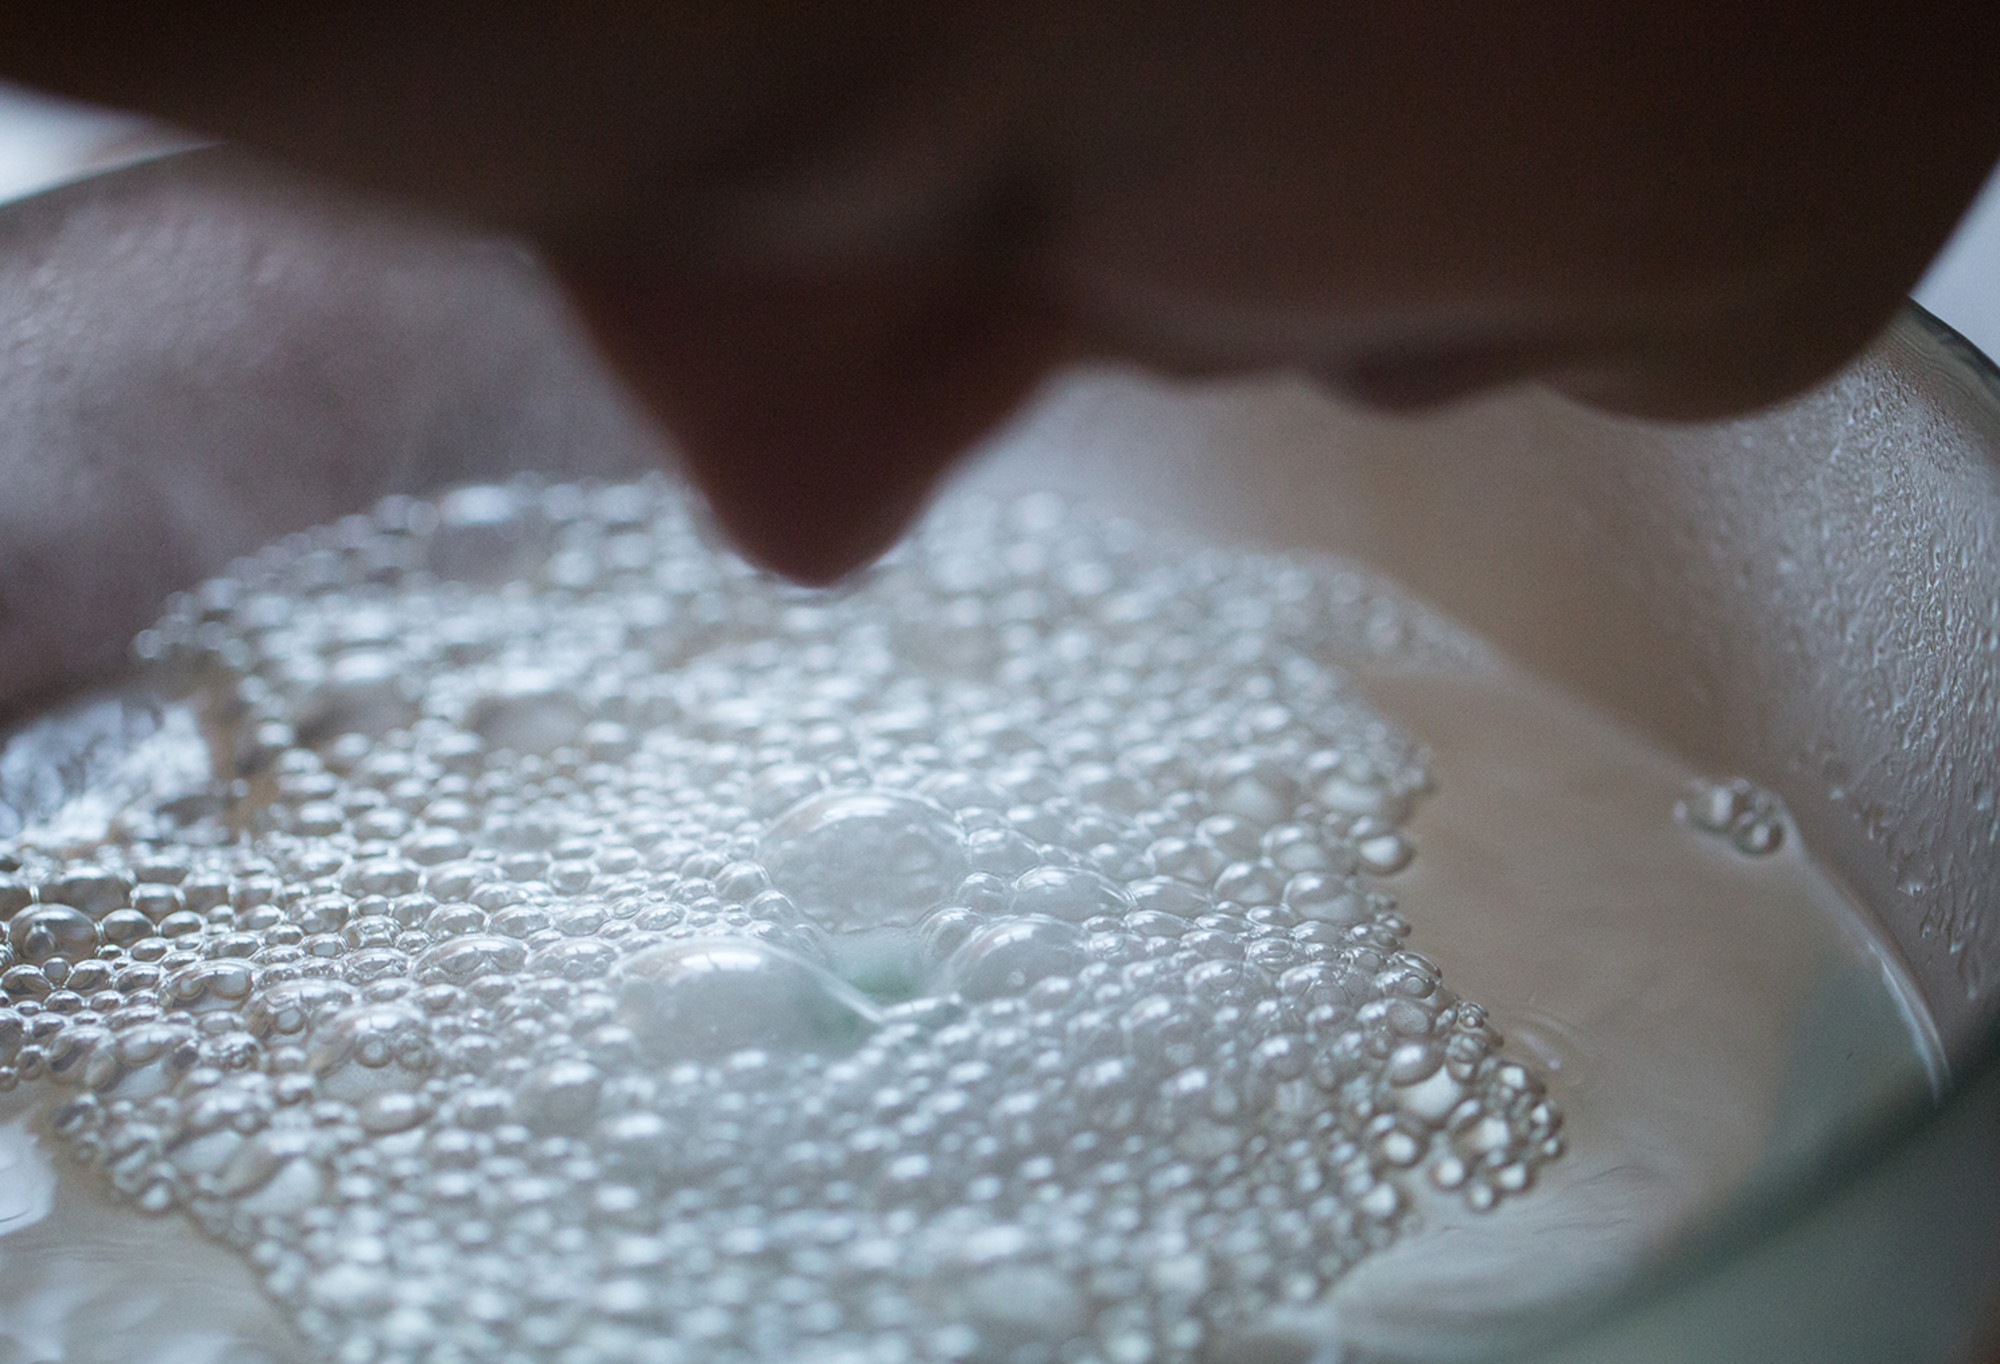 The silhouette of a person's face can be seen hovering above a bubbling, steaming bowl of water.